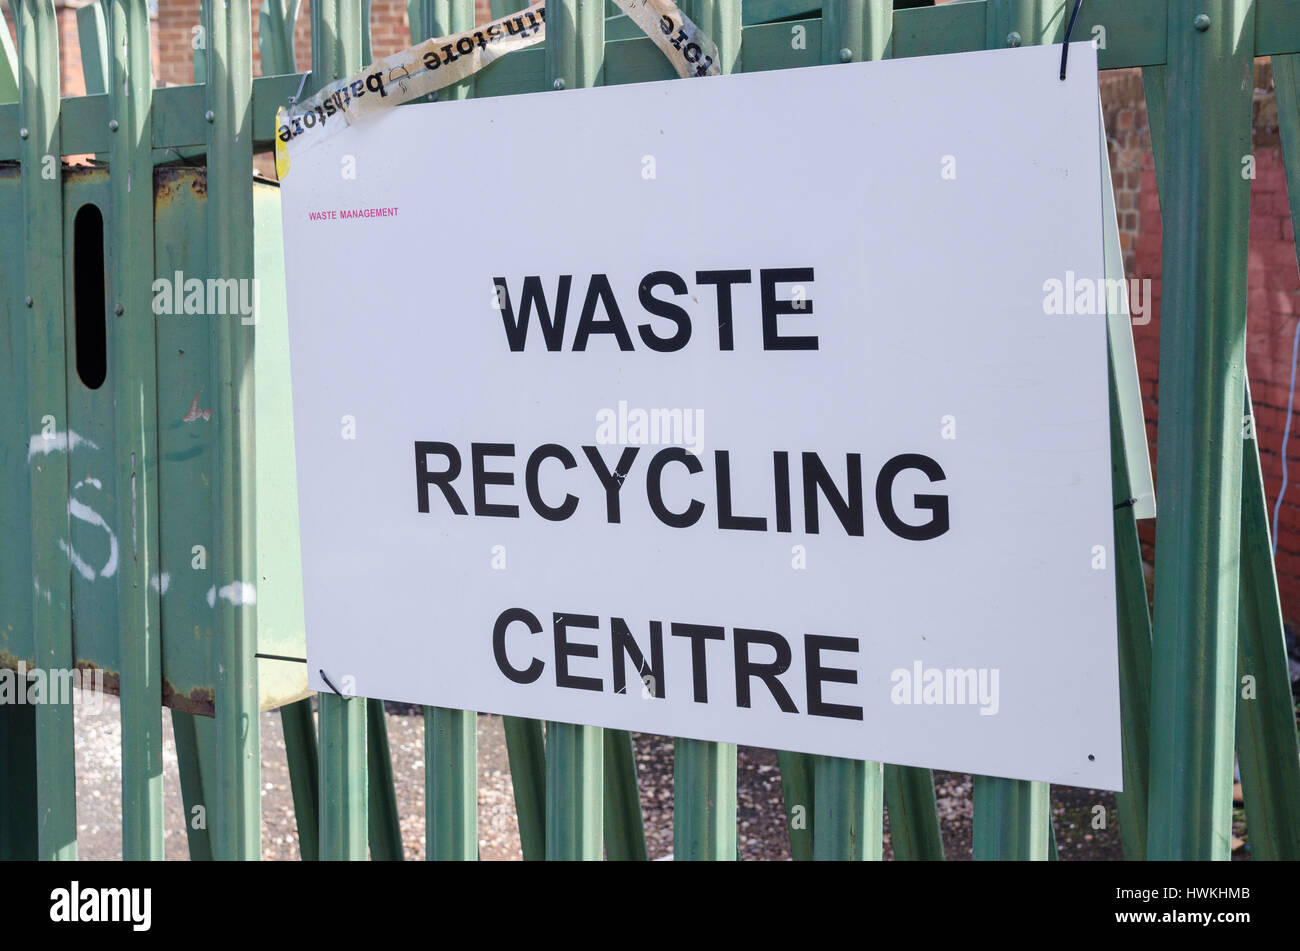 Home made sign for Waste Recycling Centre tied to iron railings Stock Photo